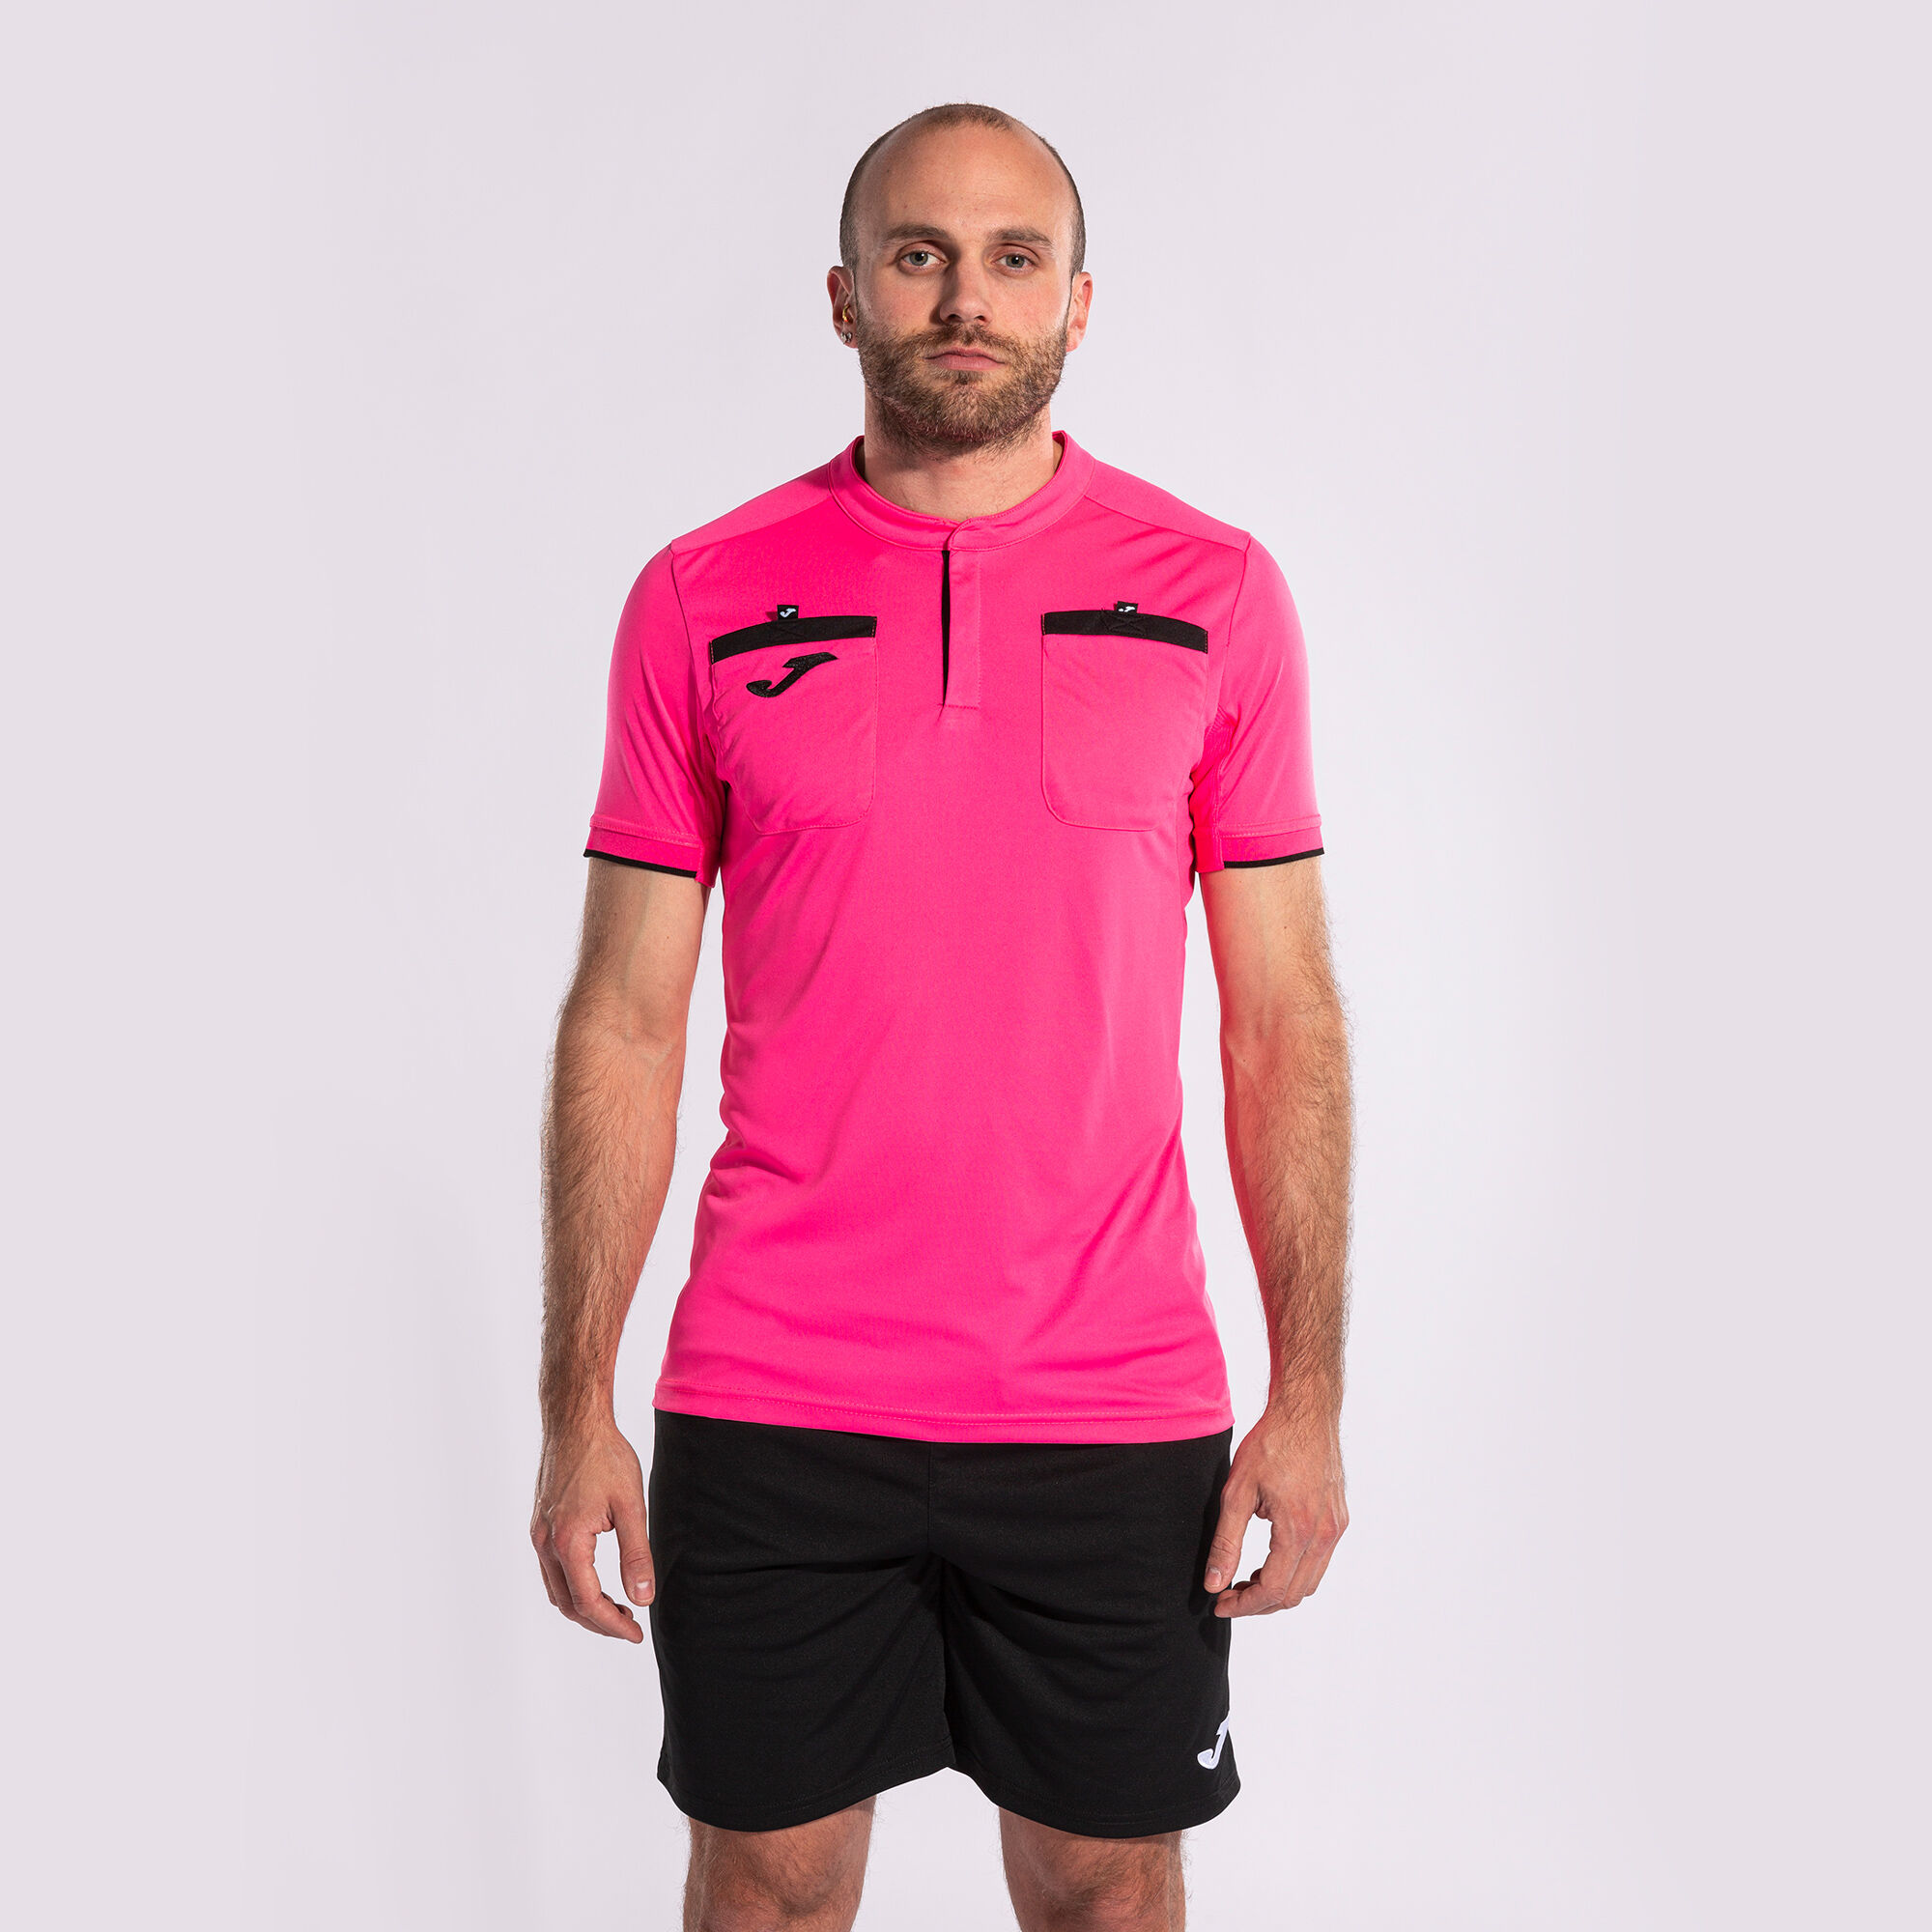 MAILLOT MANCHES COURTES HOMME REFEREE ROSE FLUO